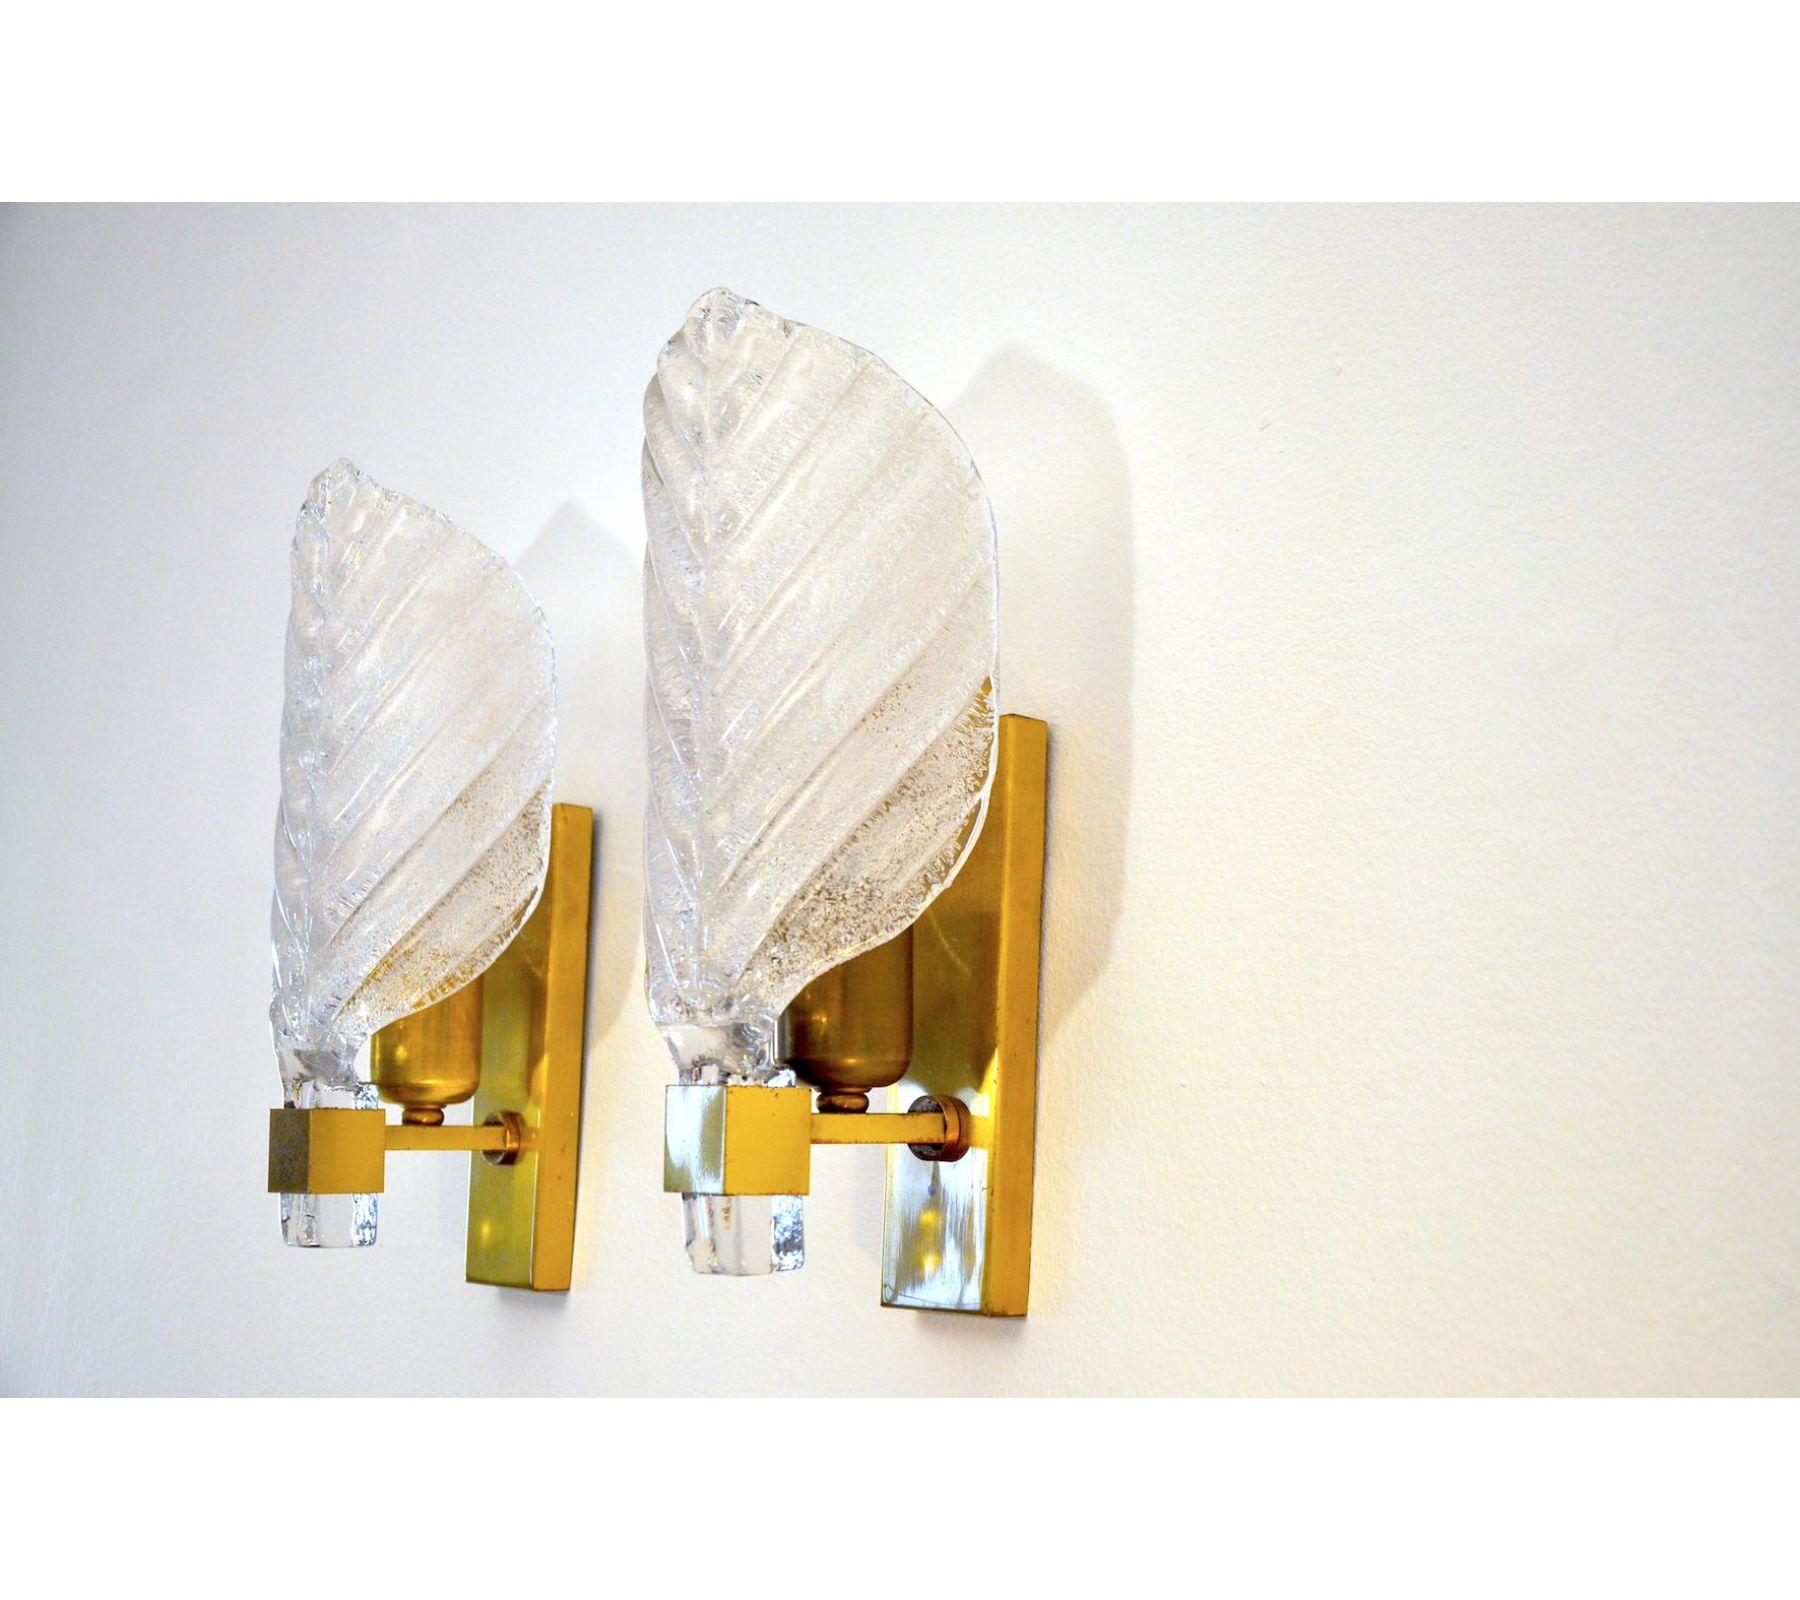 Pairs of sconces by Carl Fagerlund for Lyfa dating from the 1960s. The pair of sconces are made of brass and leaf-shaped glass. The diffused light is soft and harmonious, perfect to illuminate your interior. Time mark according to the age of the